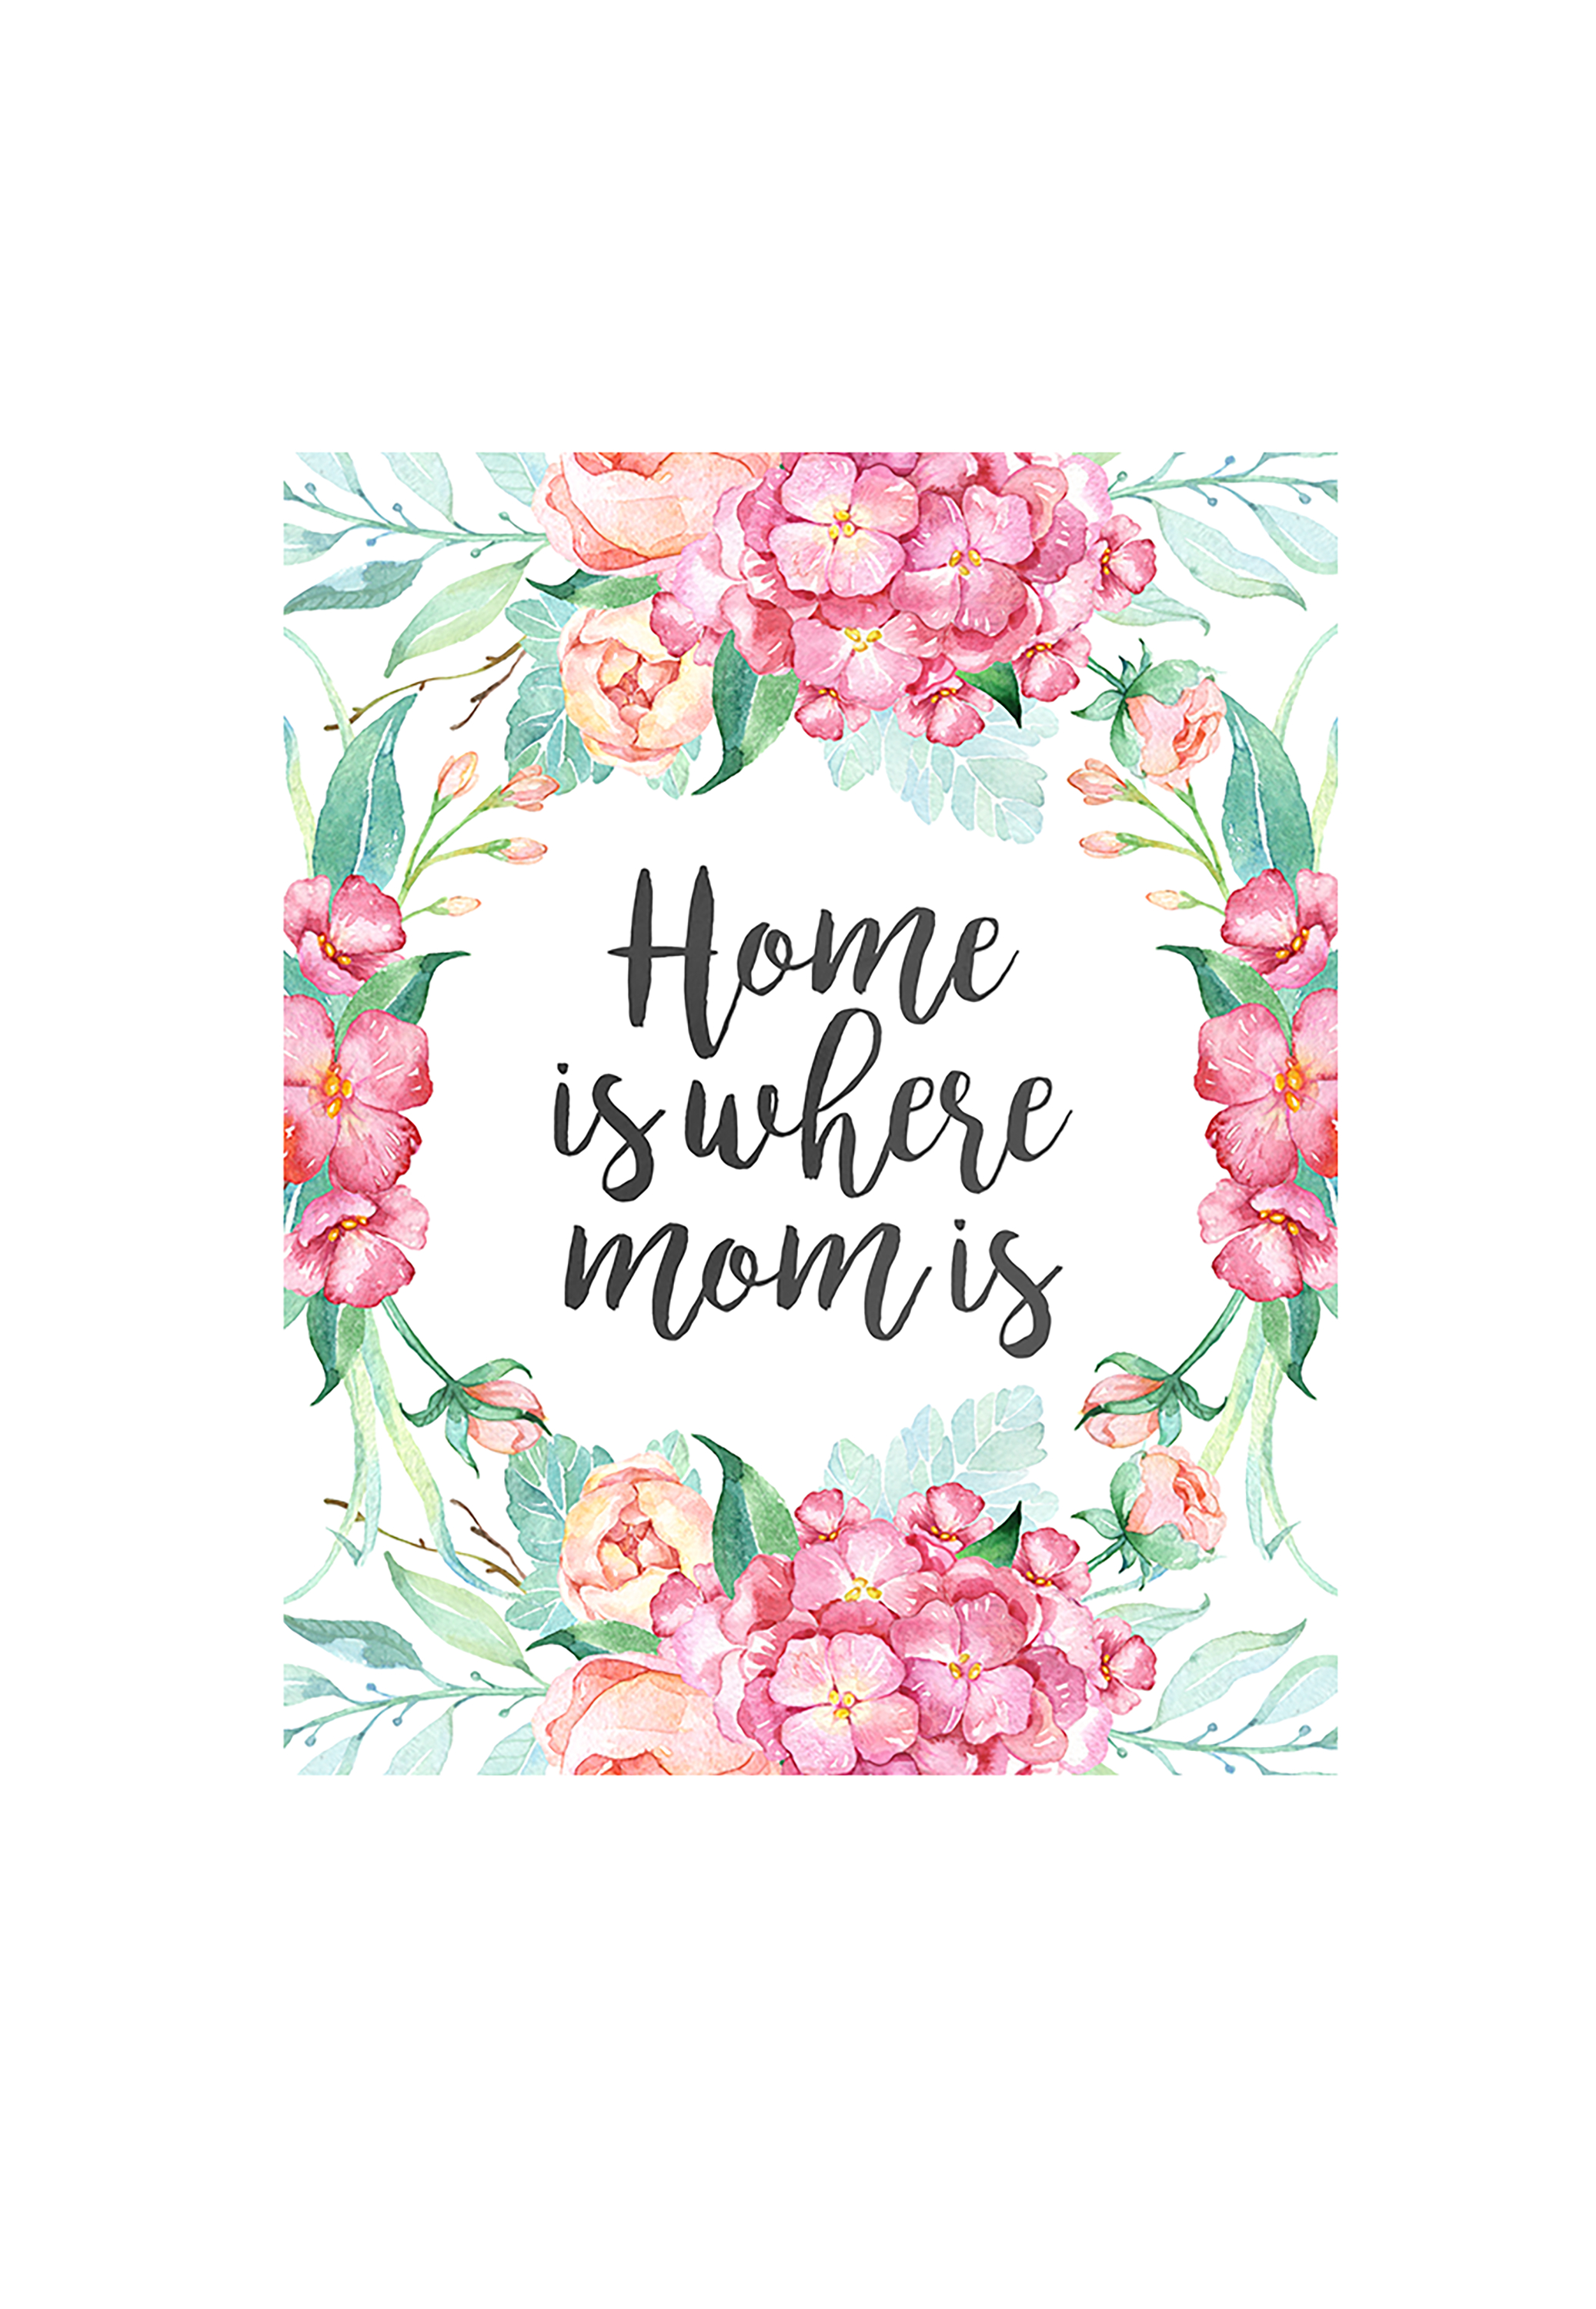 18 Mothers Day Cards - Free Printable Mother&amp;#039;s Day Cards - Free Printable Mothers Day Card From Dog